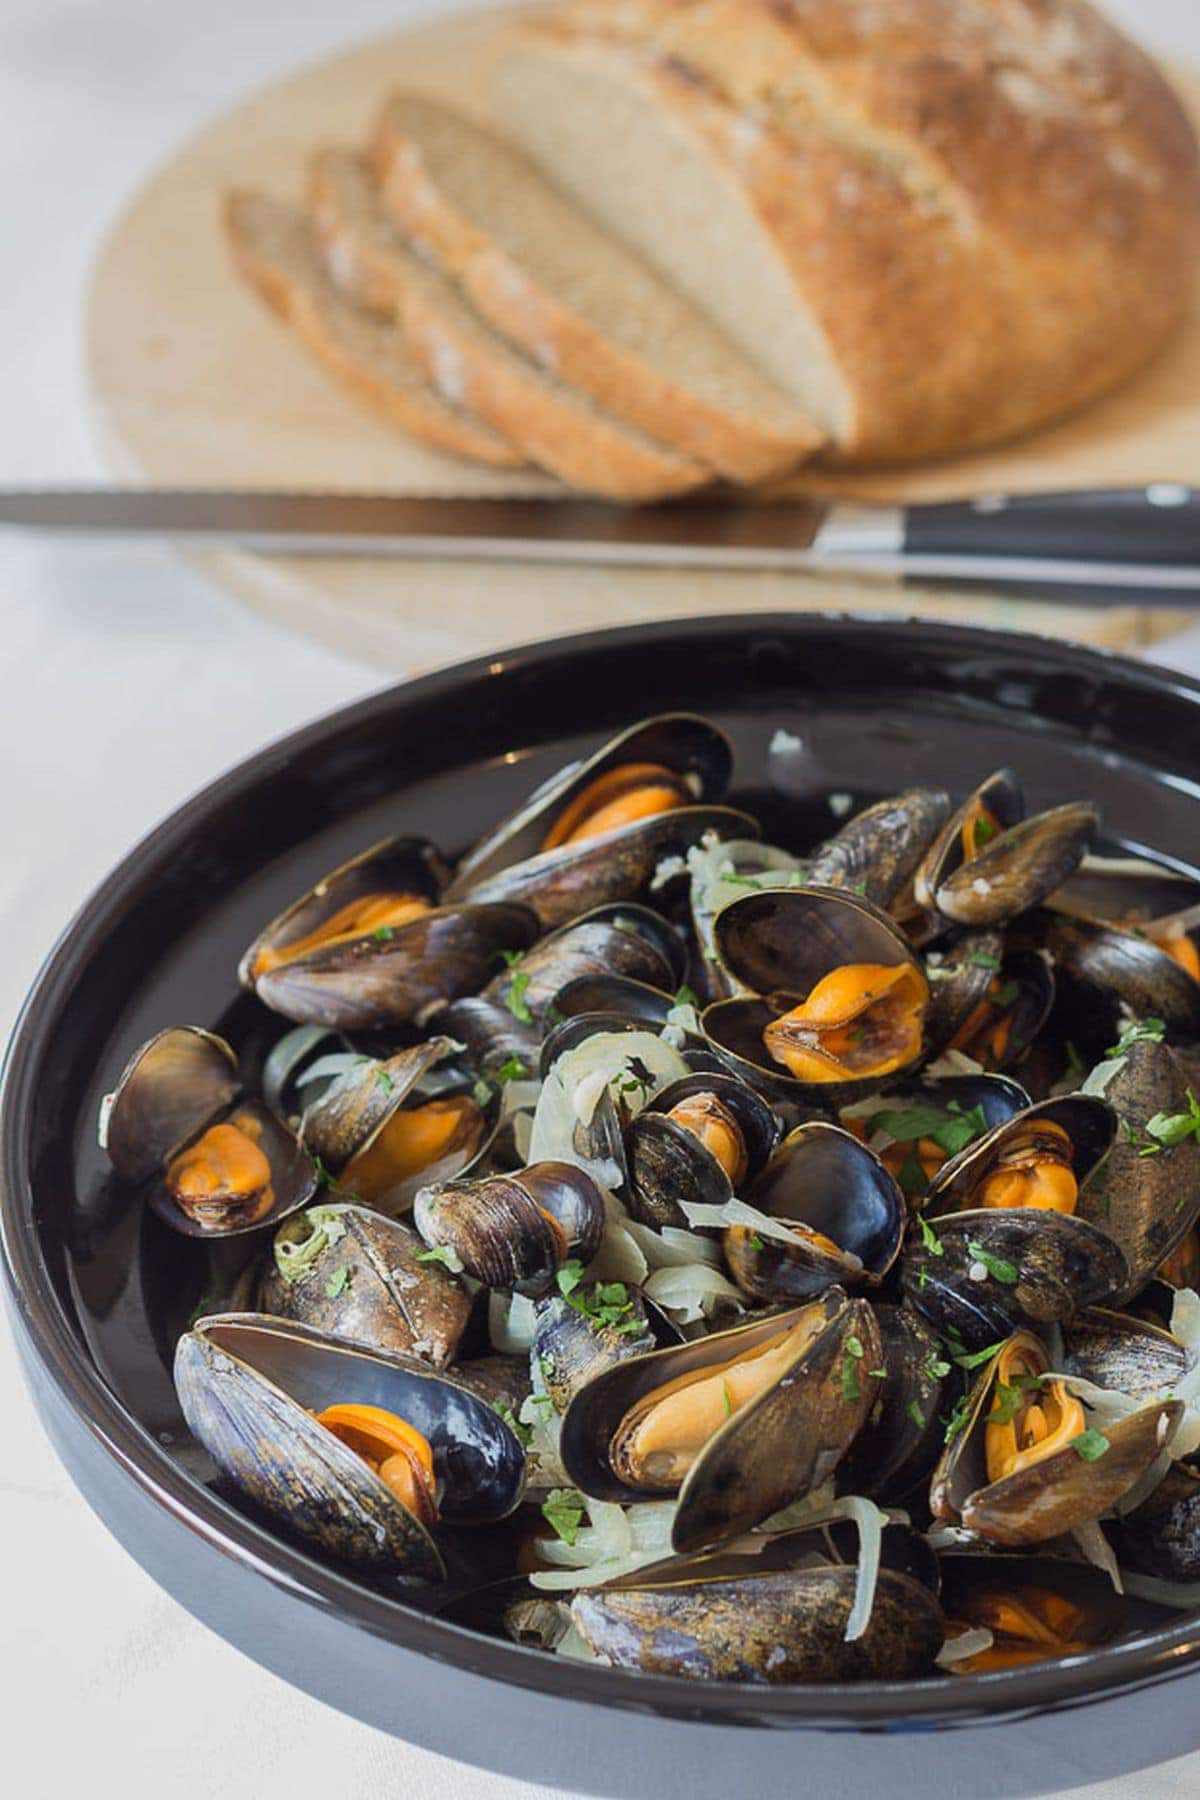 Cooked moules marinieres in a large bowl with a freshly made sliced cob loaf in the background.